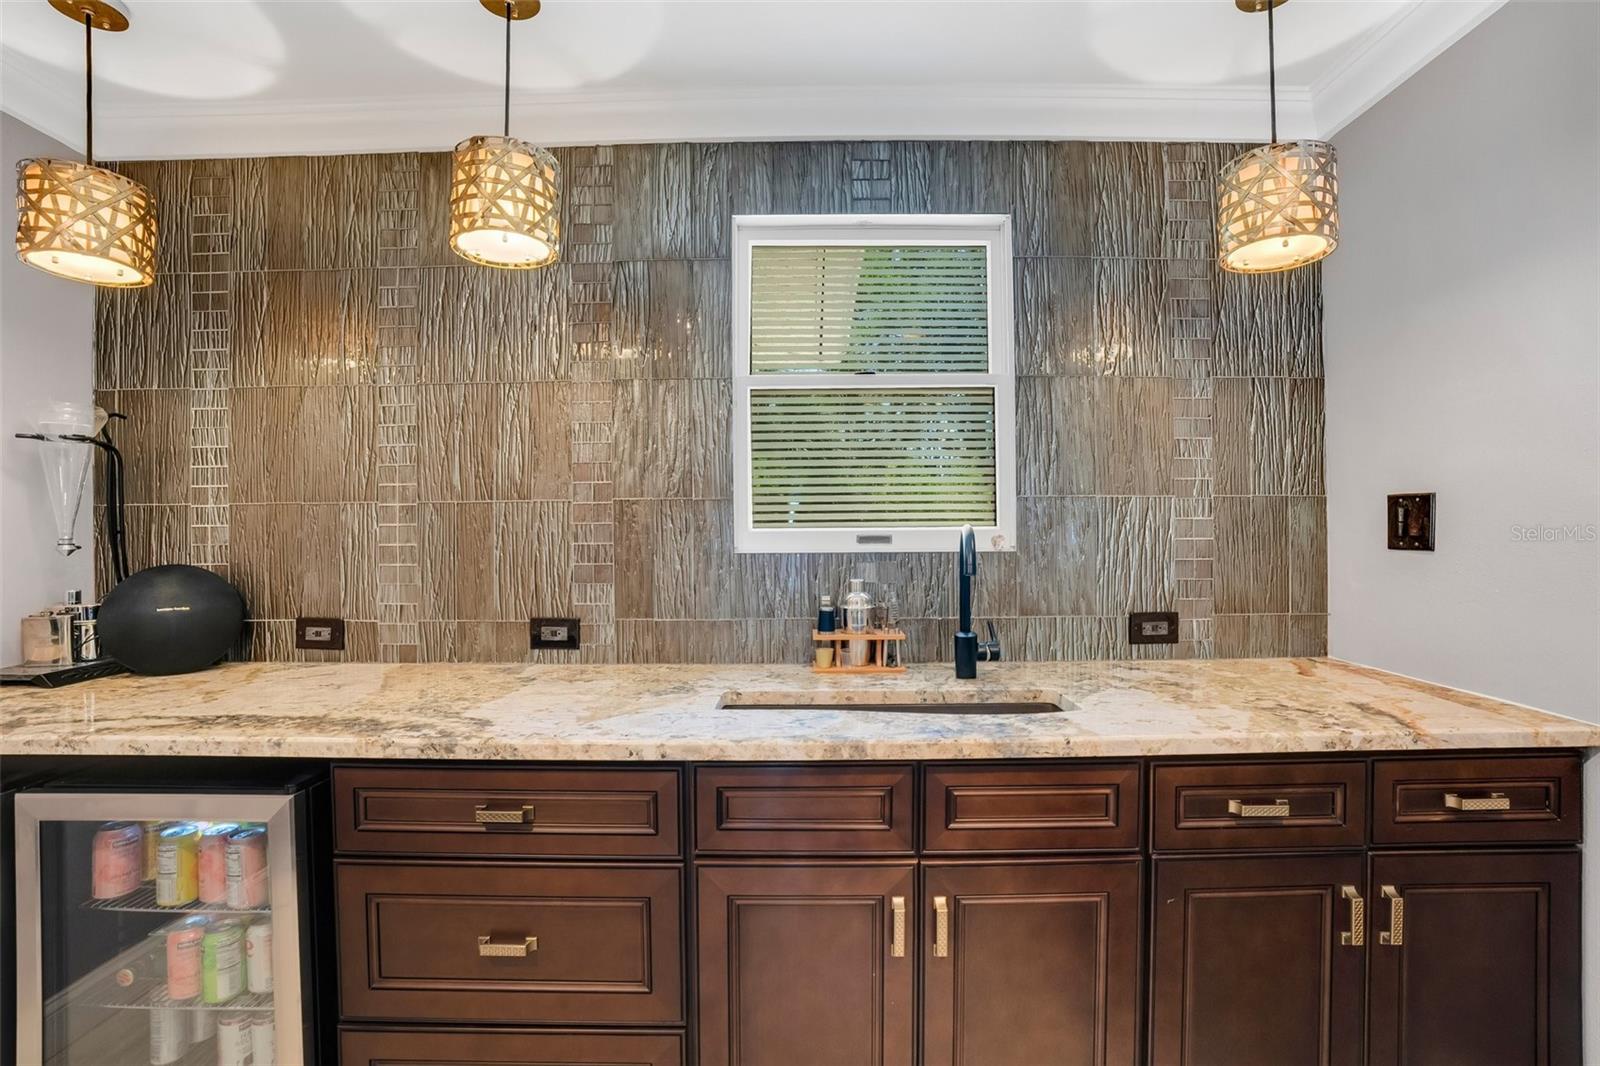 Wet bar (in office/flex space) with matching stone counterops and custom solid wood cabinets, sink and 2 wine/drink refrigerators